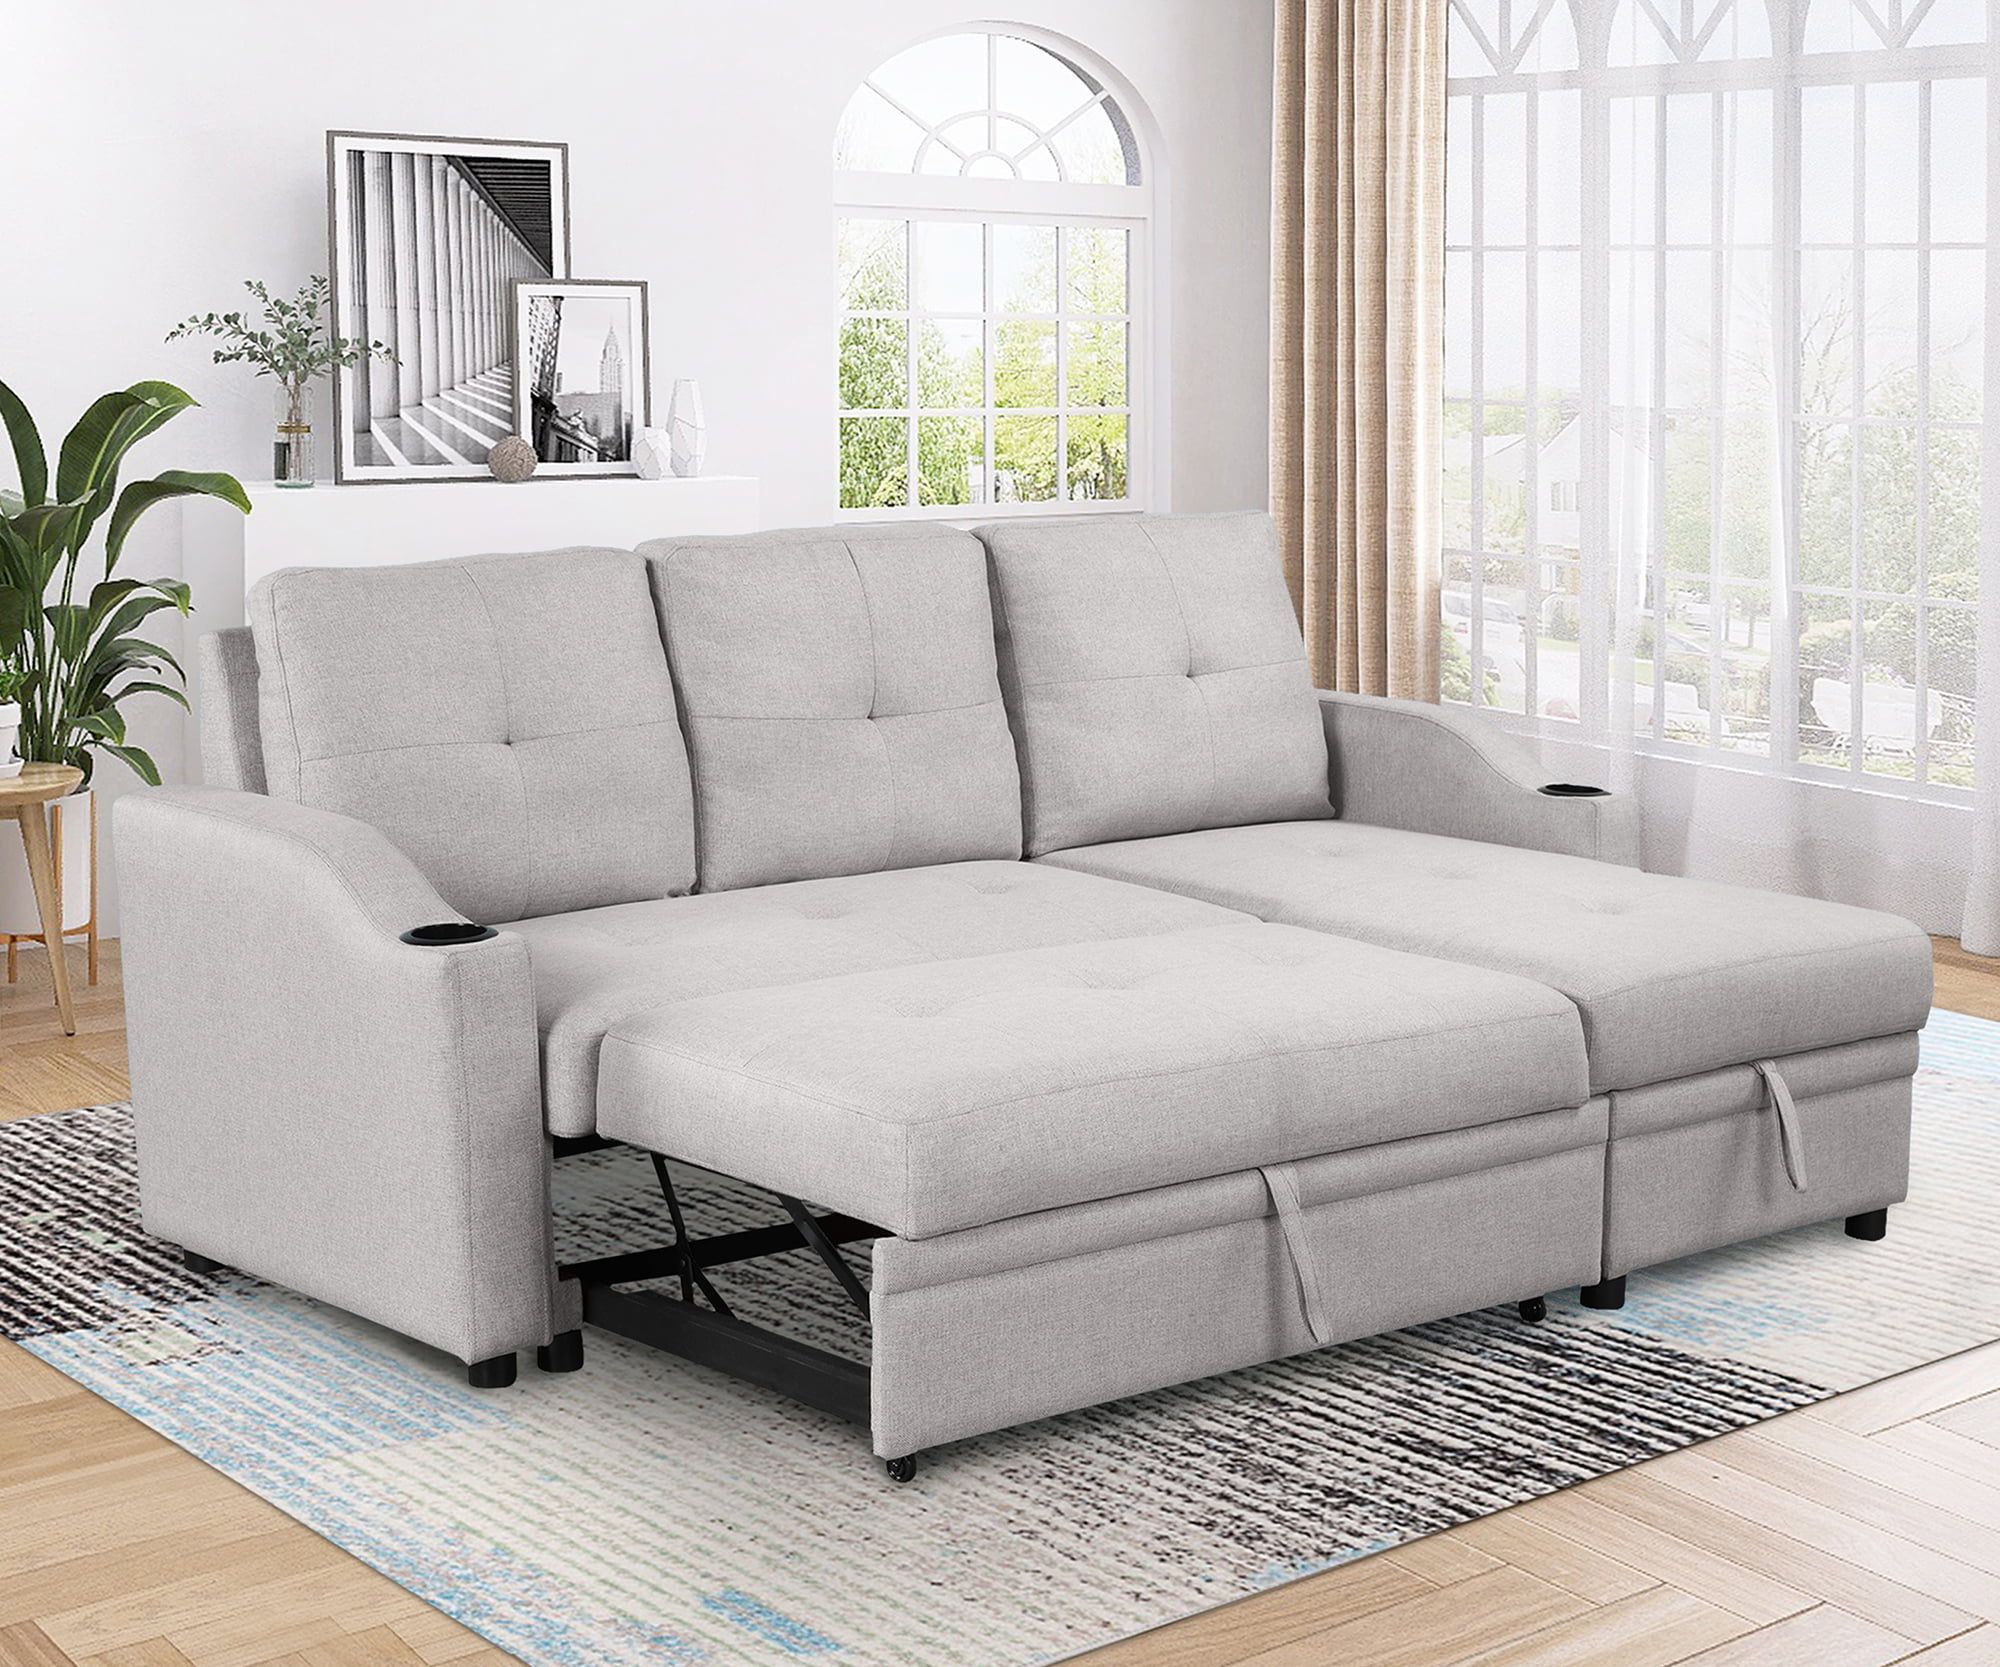 Churanty Pull Out Bed Sleeper Sectional Sofa Upholstery Reversible Couch  With Storage Chaise Cup Holder For Small Spaces,Gray – Walmart Within Reversible Pull Out Sofa Couches (View 2 of 15)